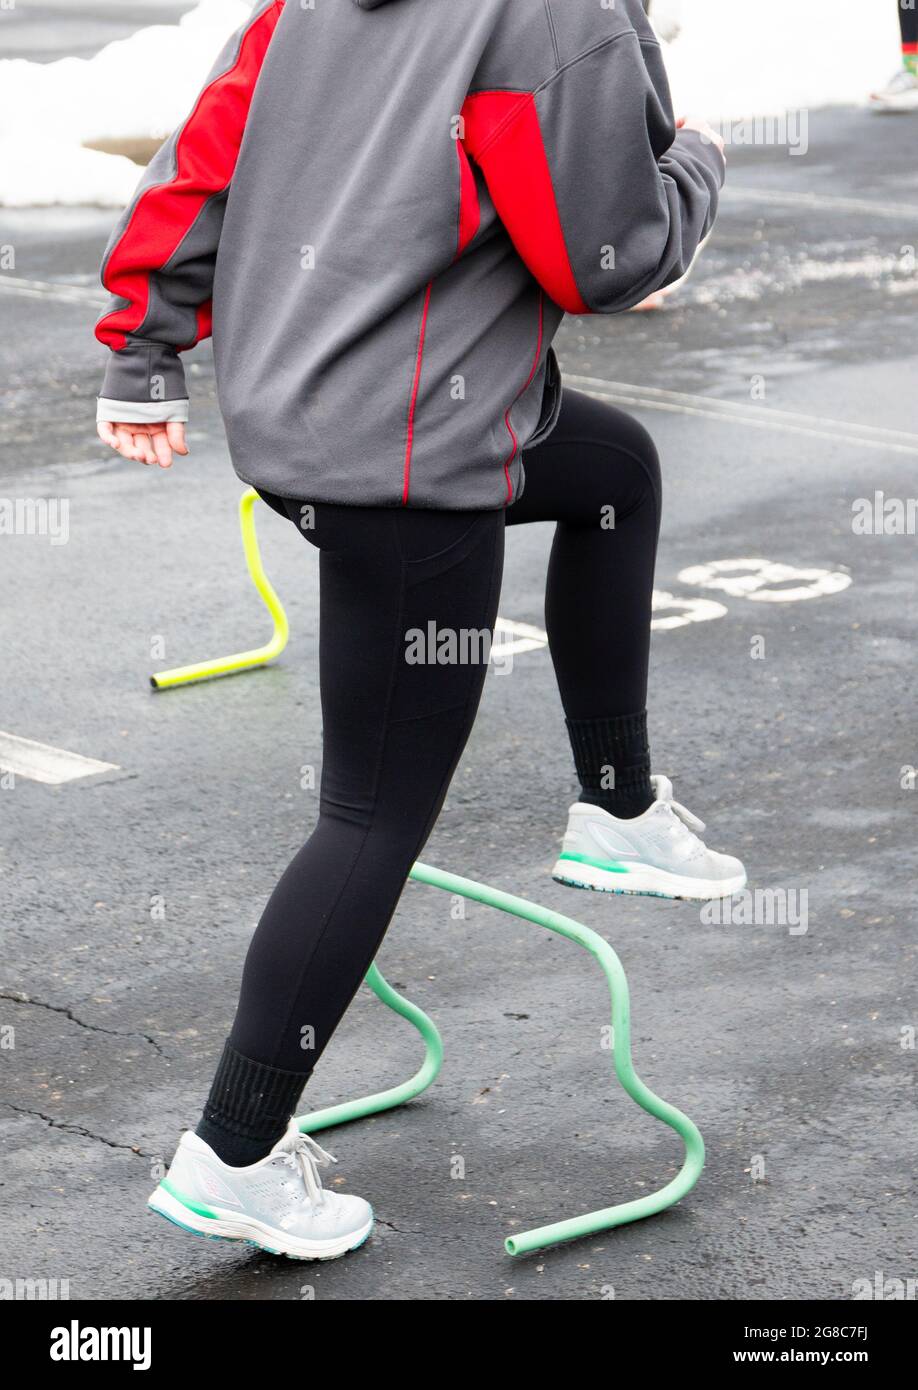 A high school girl is stepping and running over small yellow and green hurdles in a parking lot during track and field practice. Stock Photo